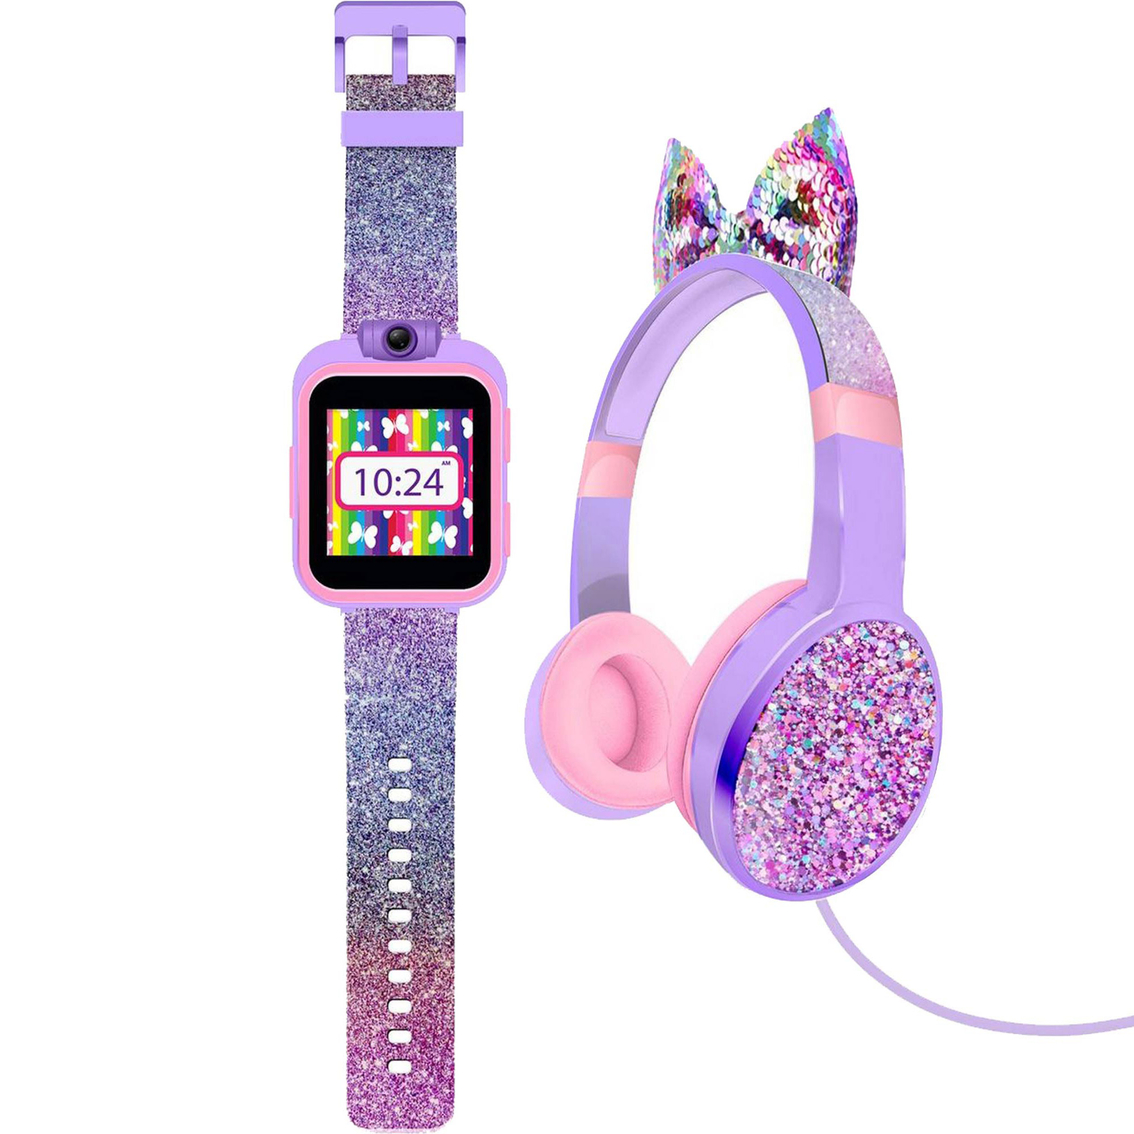 PlayZoom 2 Educational Smartwatch with Headphones: Purple Glitter and Sequin Bow - Image 3 of 7